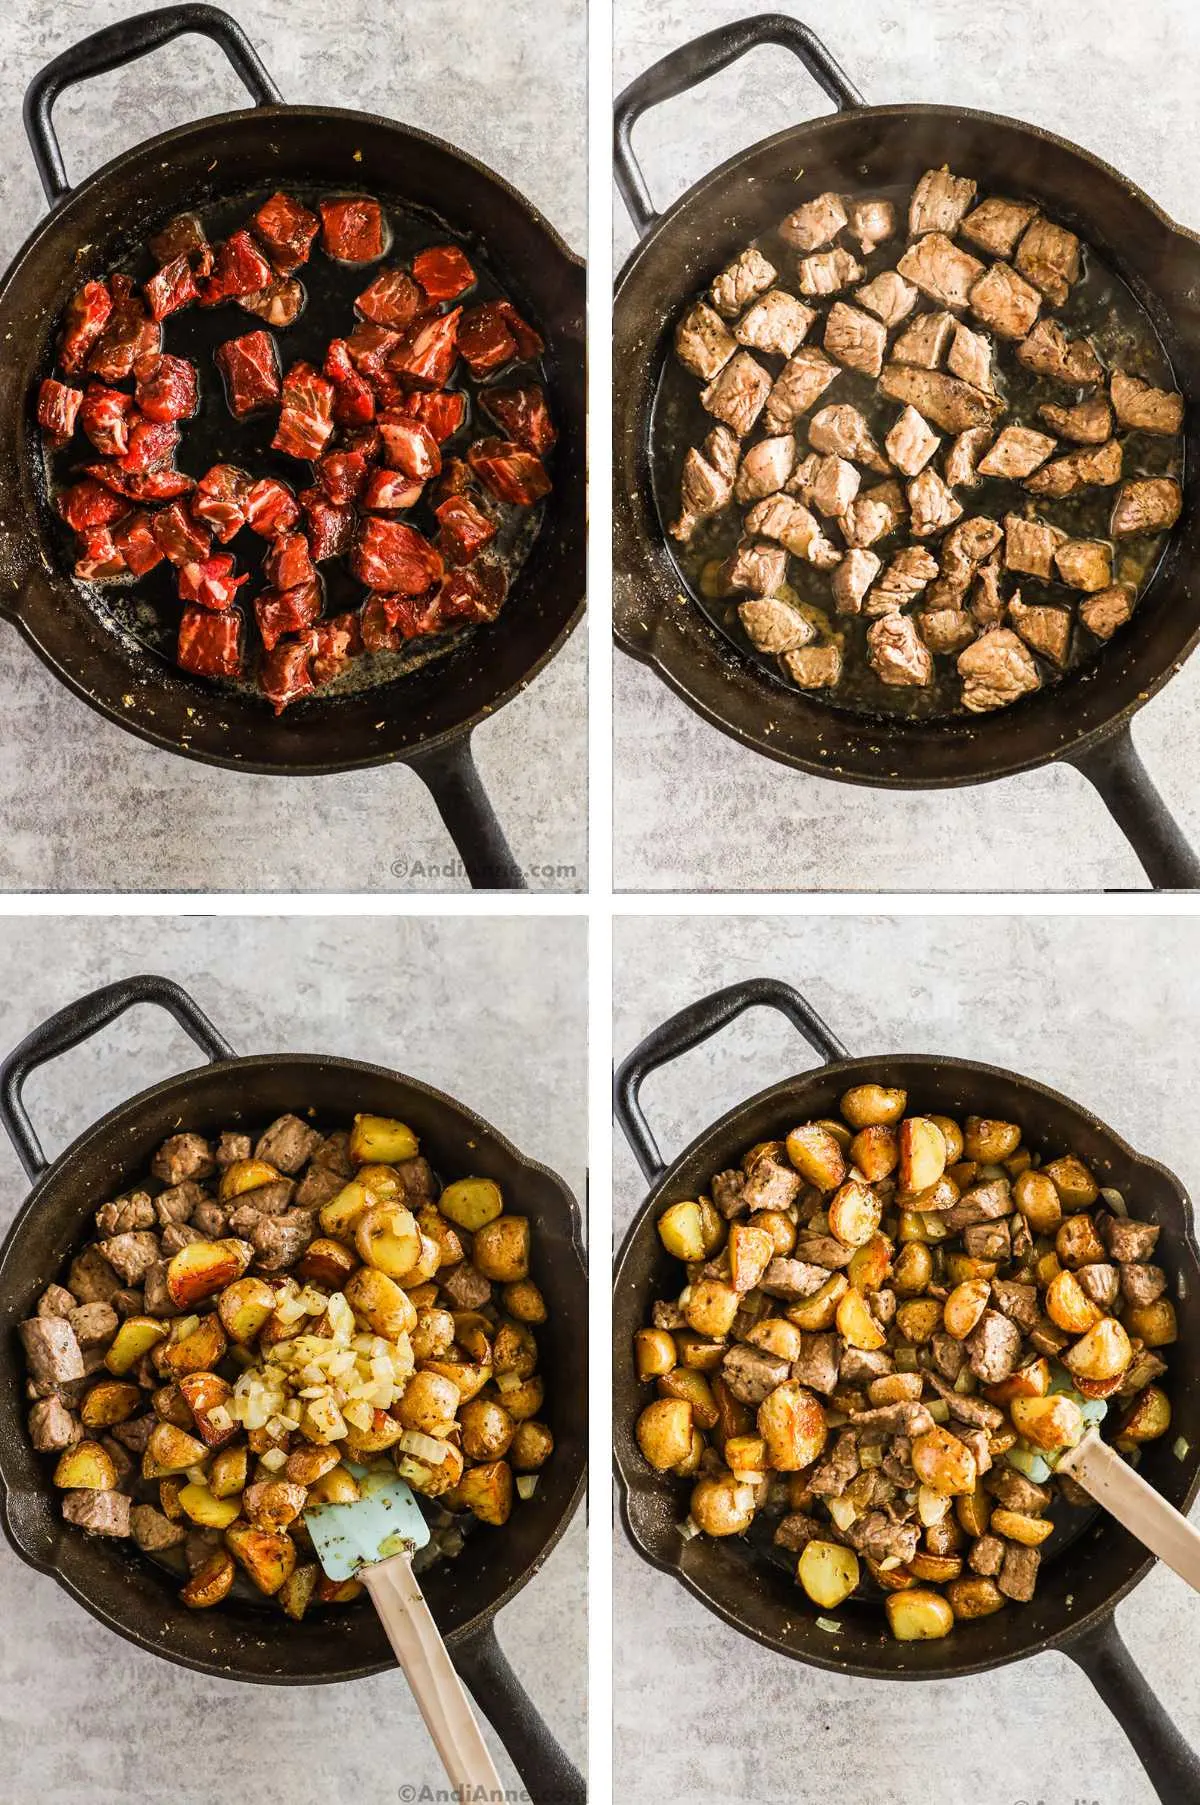 Four overhead images in one: 1. Raw steak in hot cast iron pan. 2. Cooked steak in hot cast iron pan. 3. Potato mixture is added in with the steak. 4. All ingredients are mixed together in cast iron pan. 